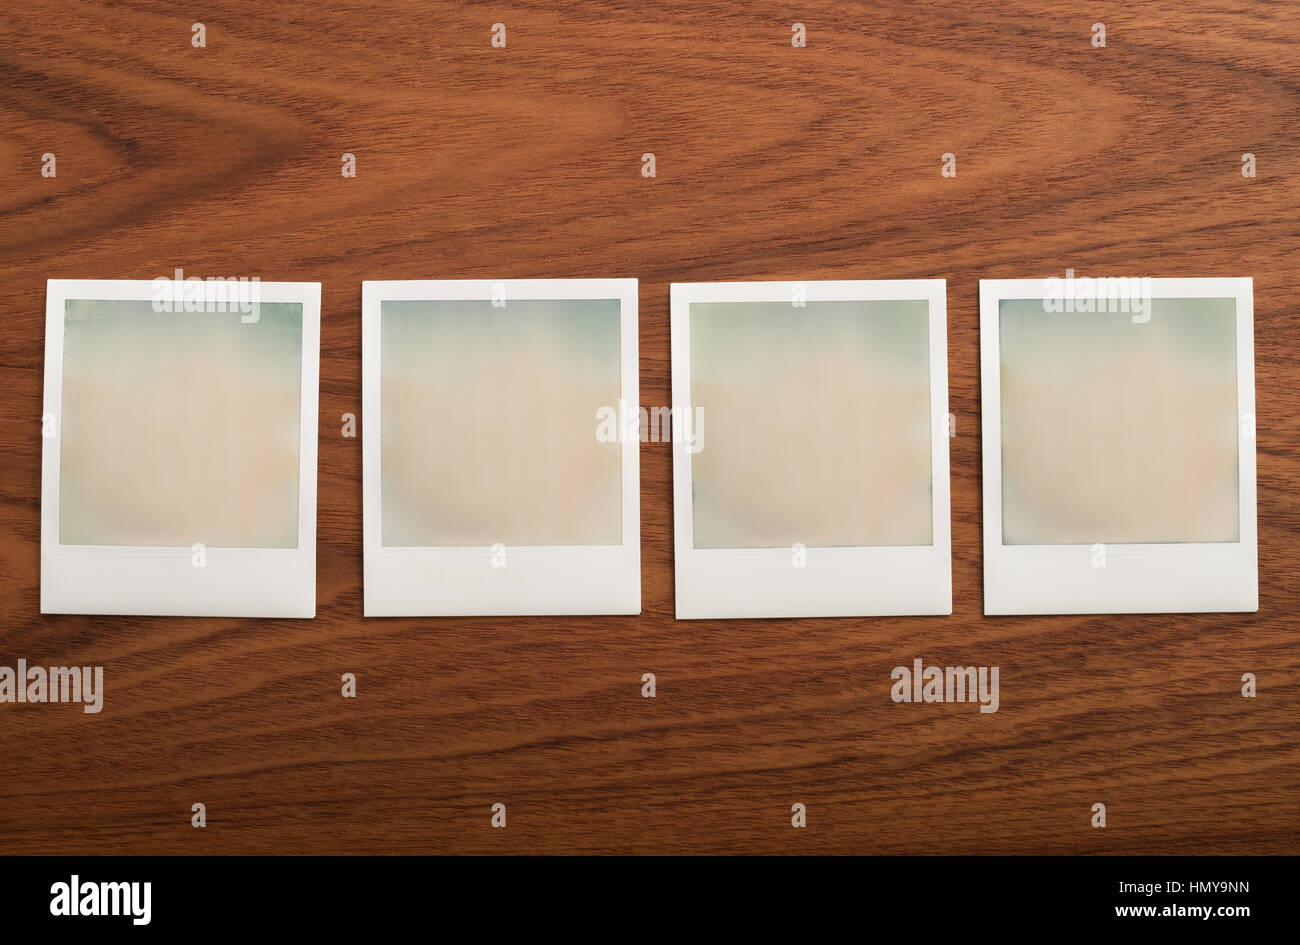 Blank instant print photographs on wooden table. Six Objects in a row. Stock Photo